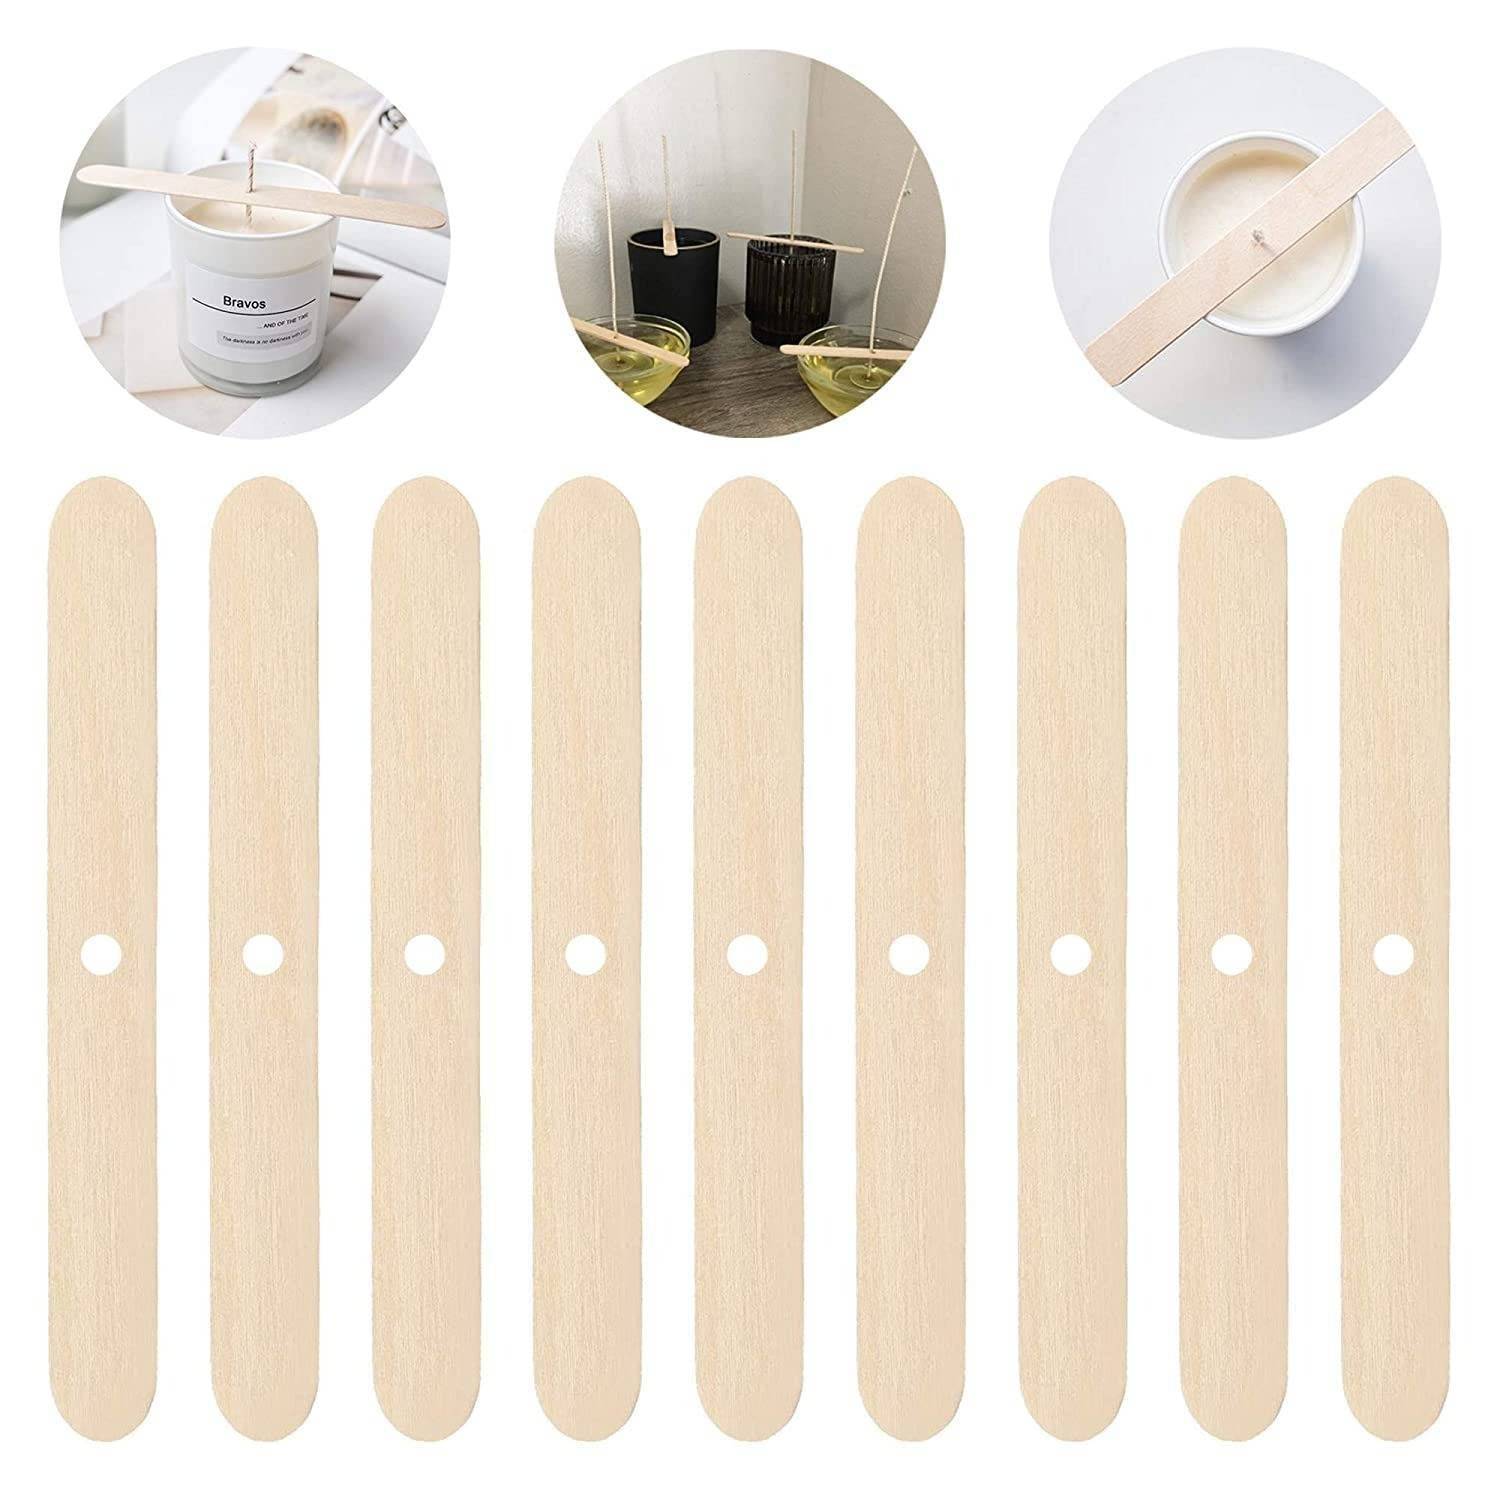 10Pcs 7 Holes Wooden Candle Wick Holders Candle Wick Centering Device Tools  Wick Clips DIY Candle